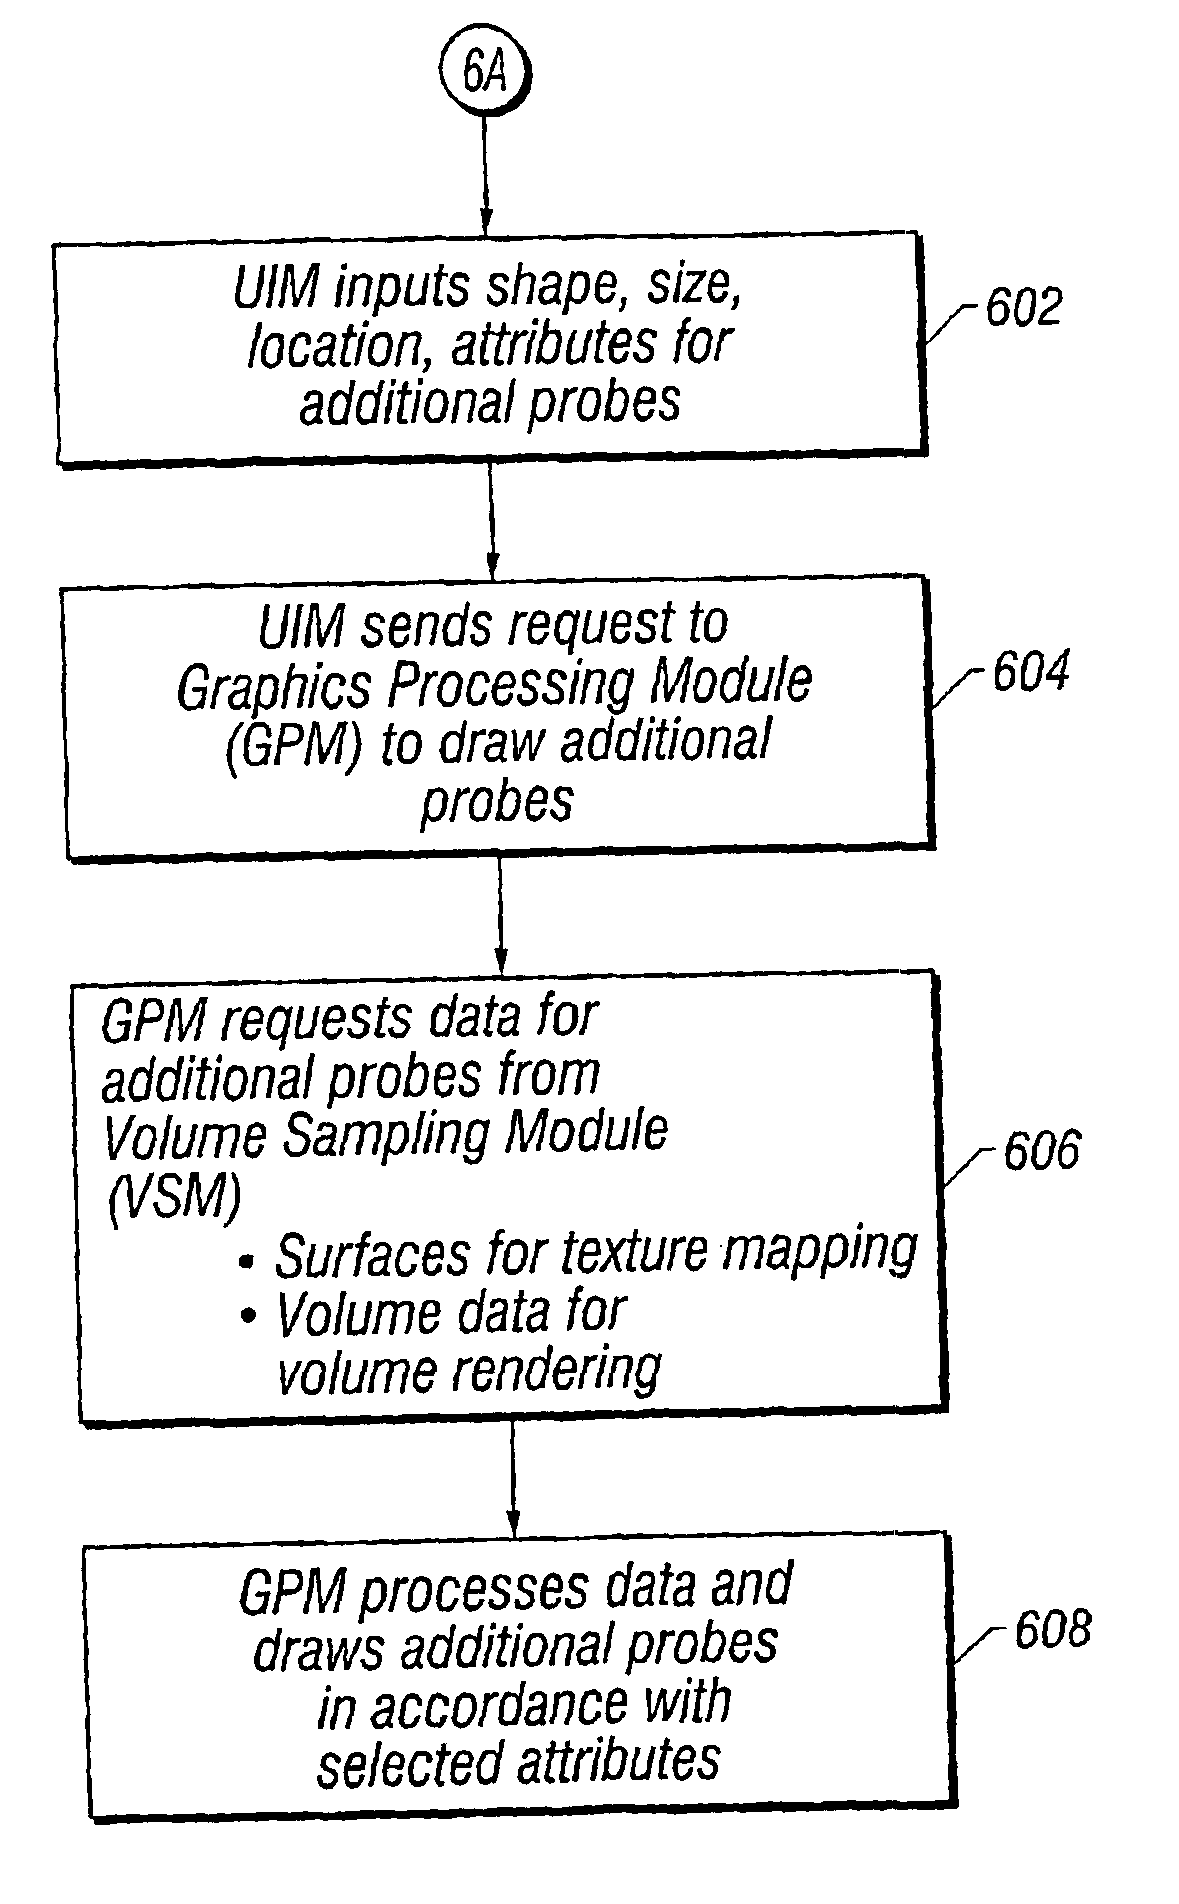 System and method for analyzing and imaging three-dimensional volume data sets